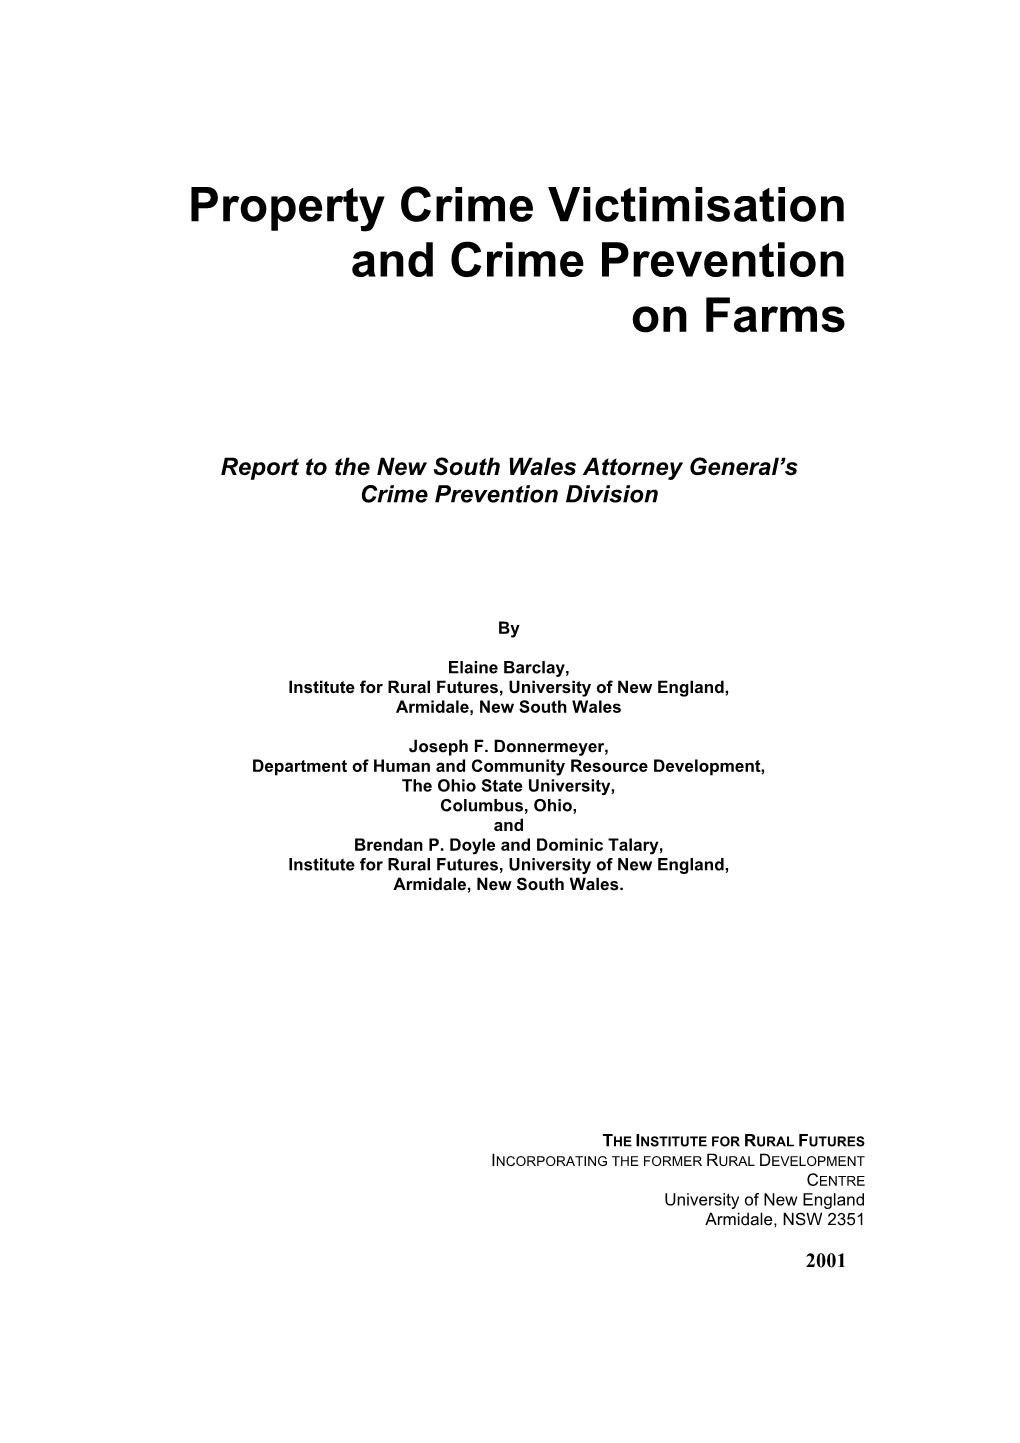 Property Crime Victimisation and Crime Prevention on Farms